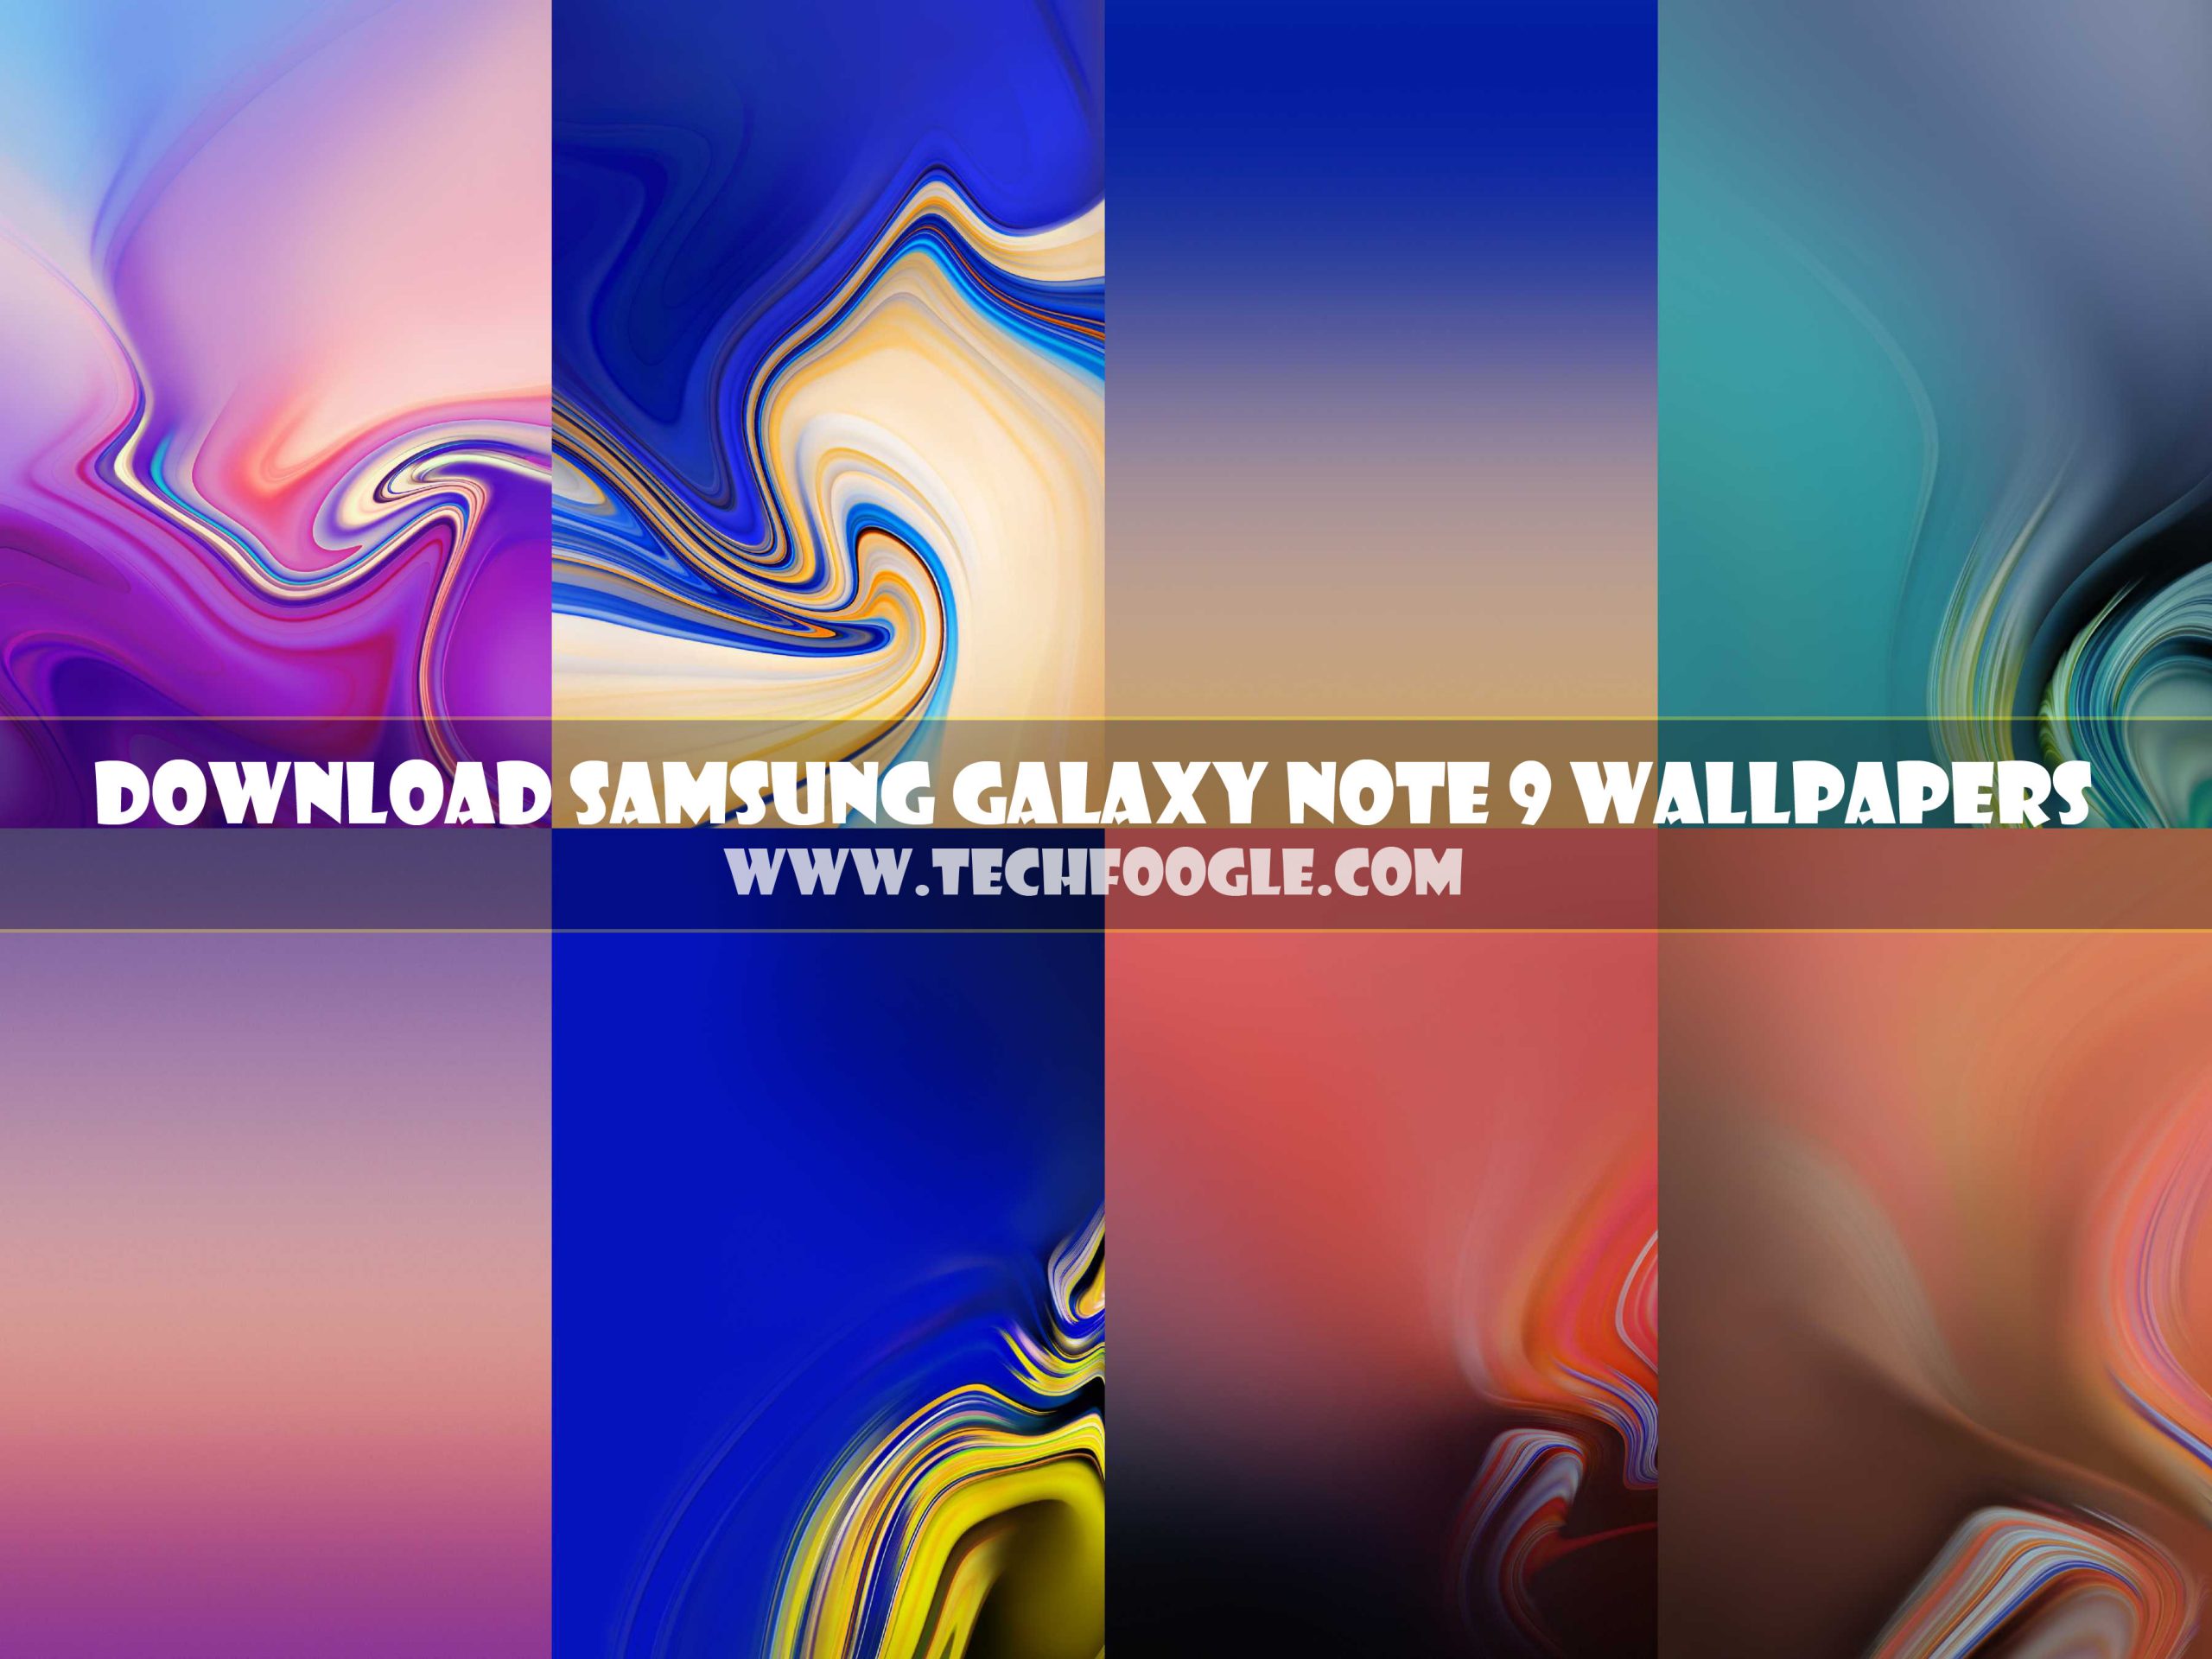 Free Download Samsung Galaxy Note 9 Stock Wallpapers - TechFoogle